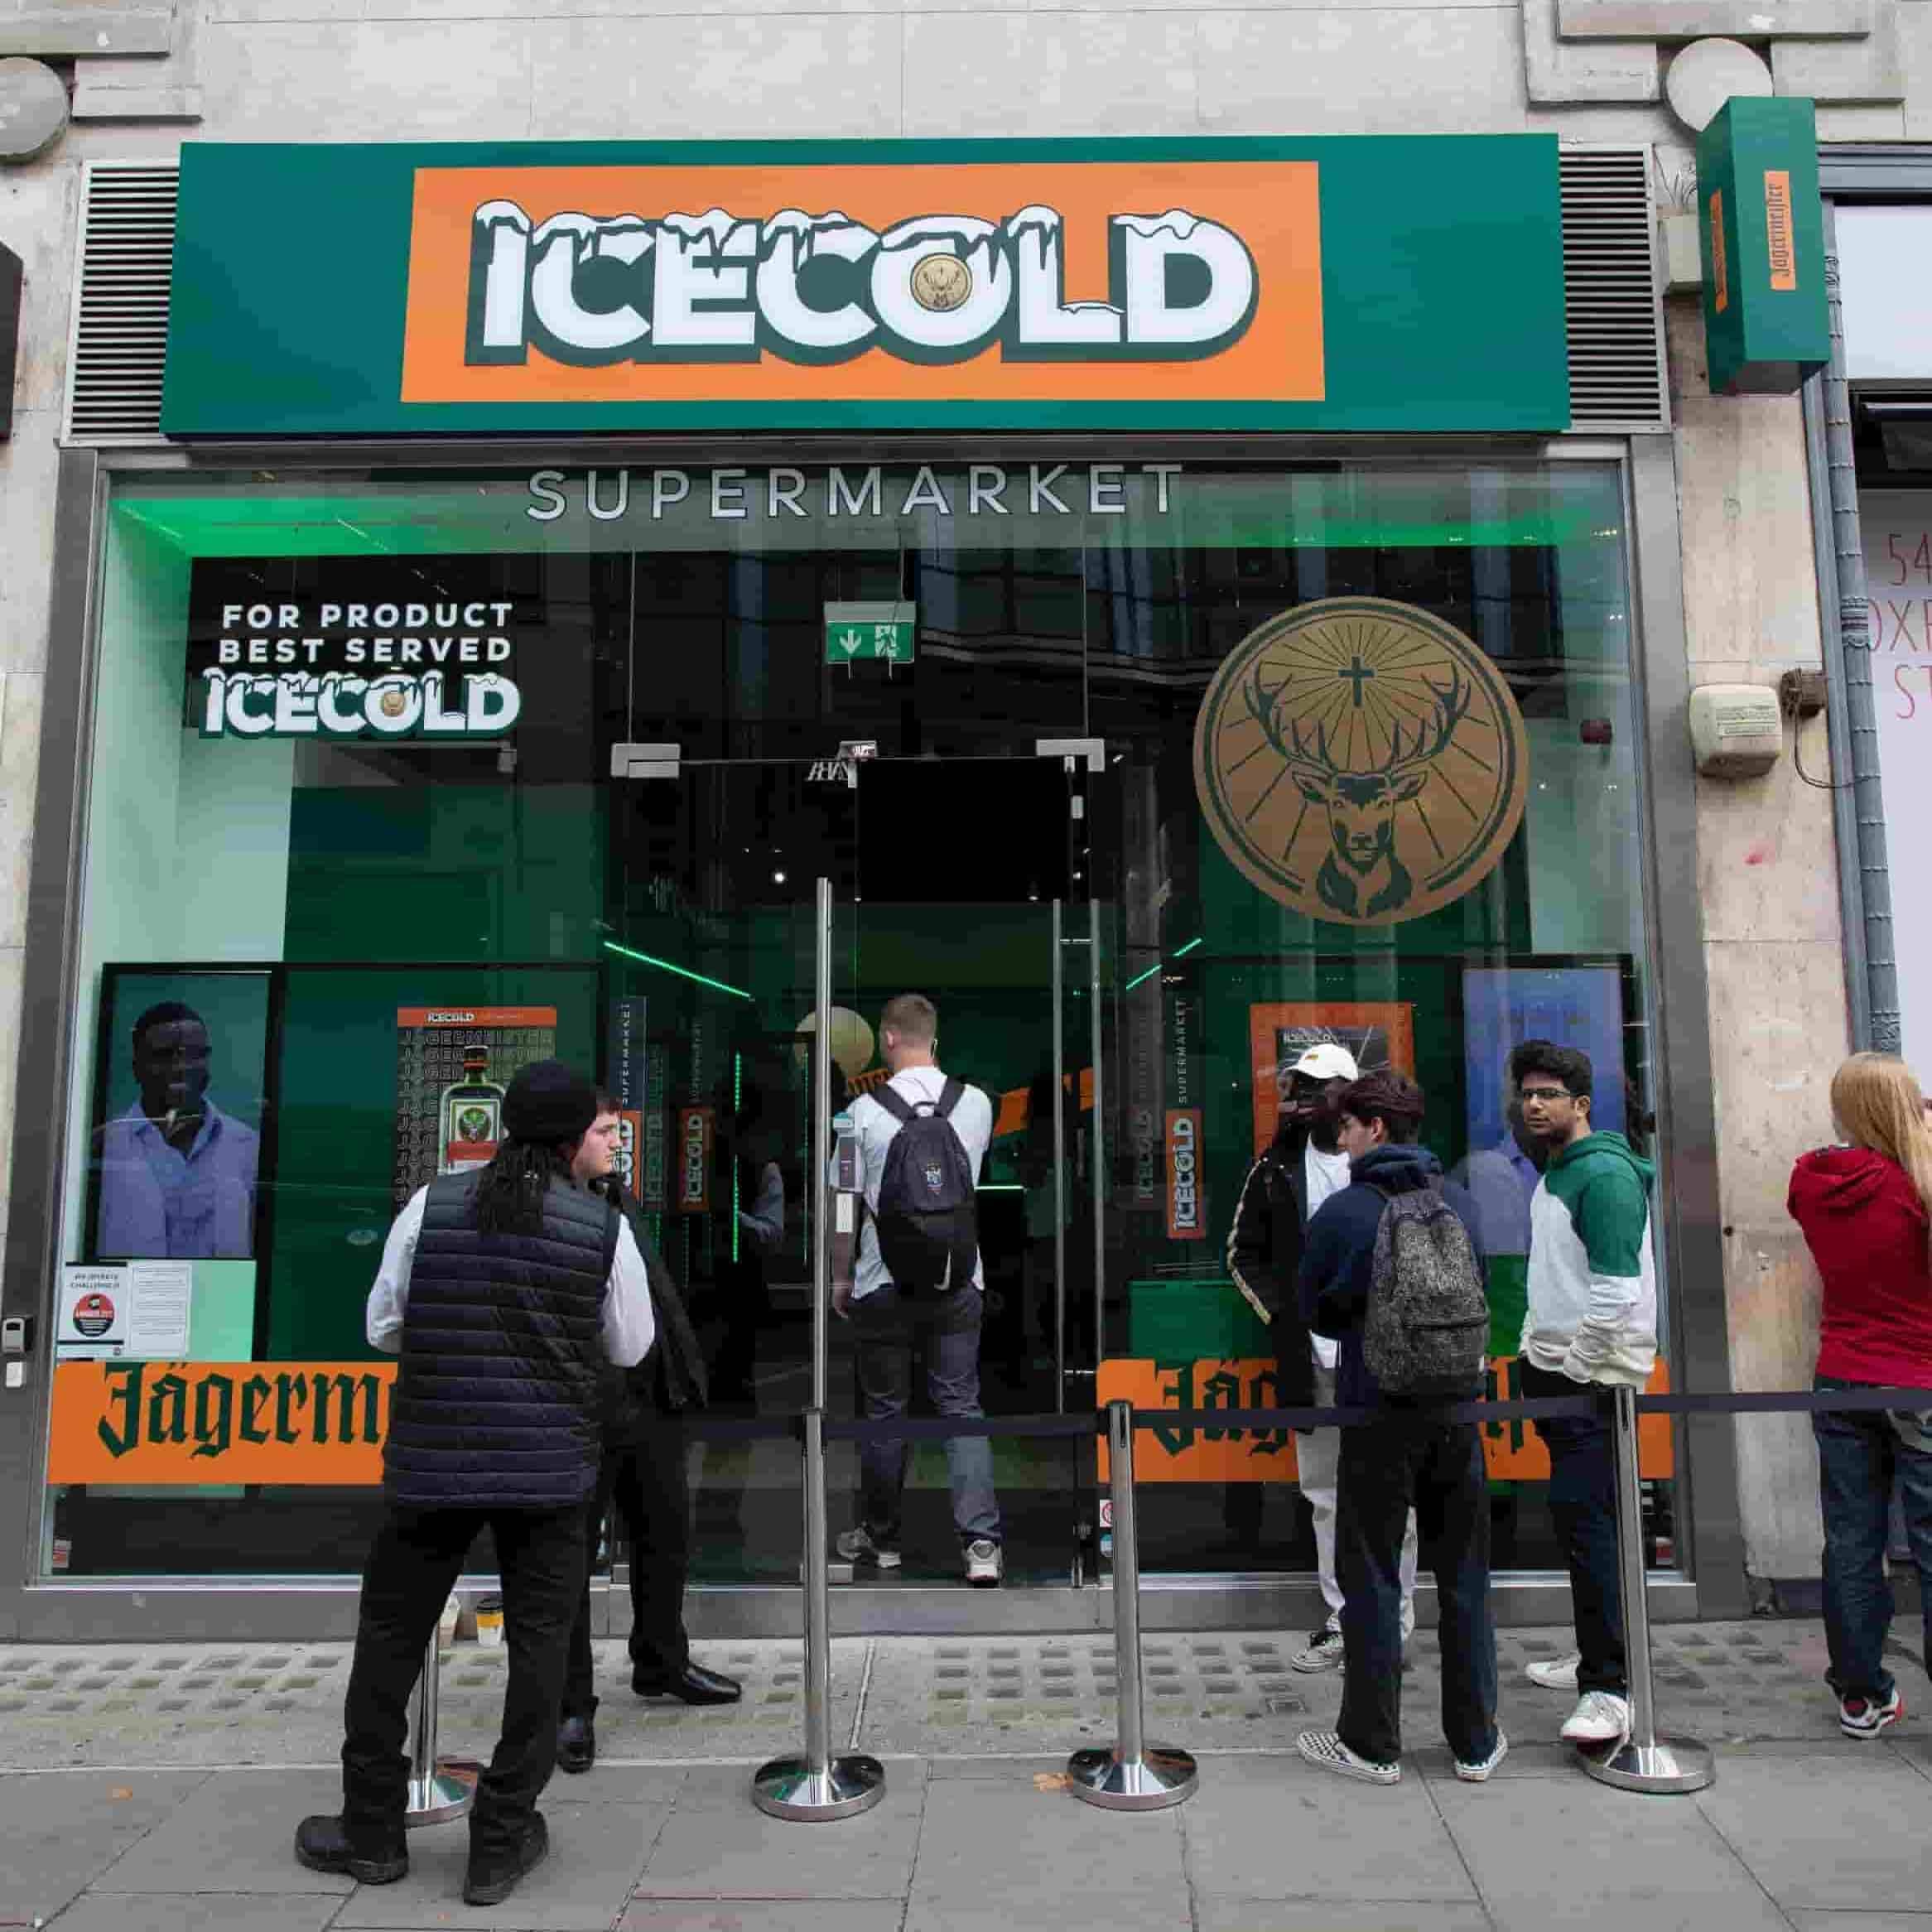 Outside of Sook space on Oxford Street with Jagermeister branding for their Ice Cold pop up